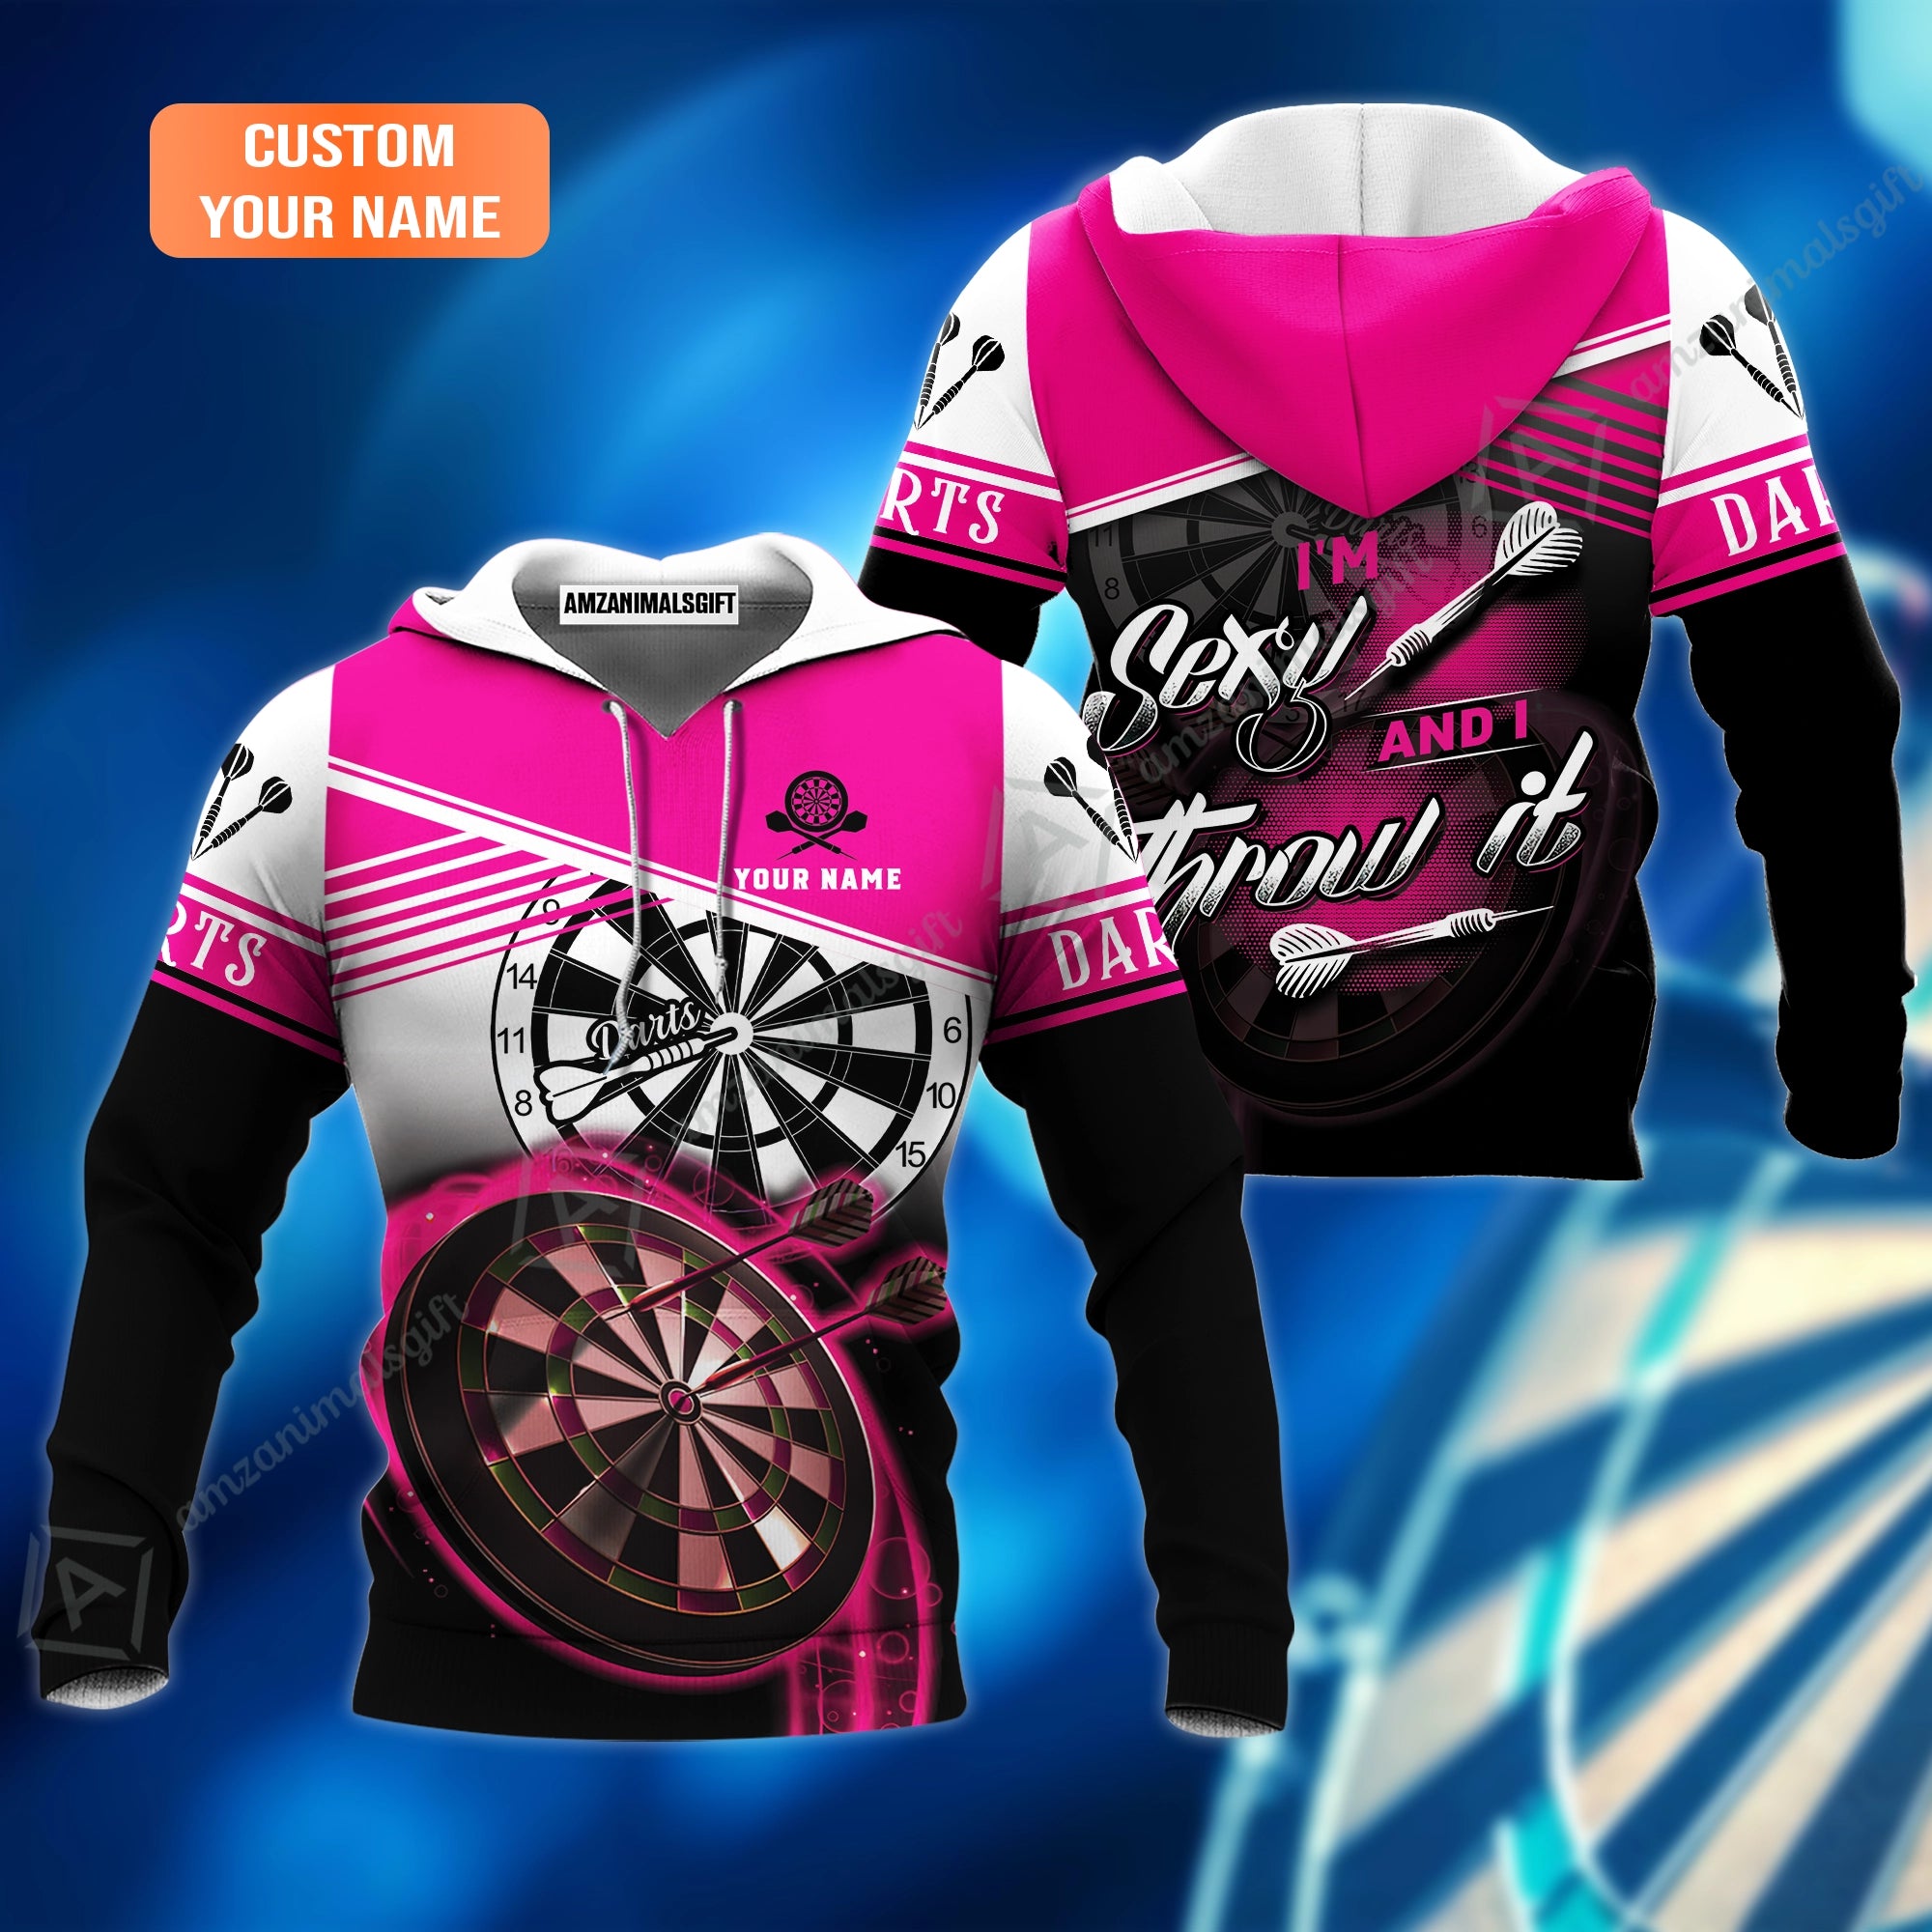 Personalized Darts Hoodie, Darts Pink Color Custom Name Hoodie I'm Sexy And I Throw It, Perfect Outfits For Darts Players, Darts Team